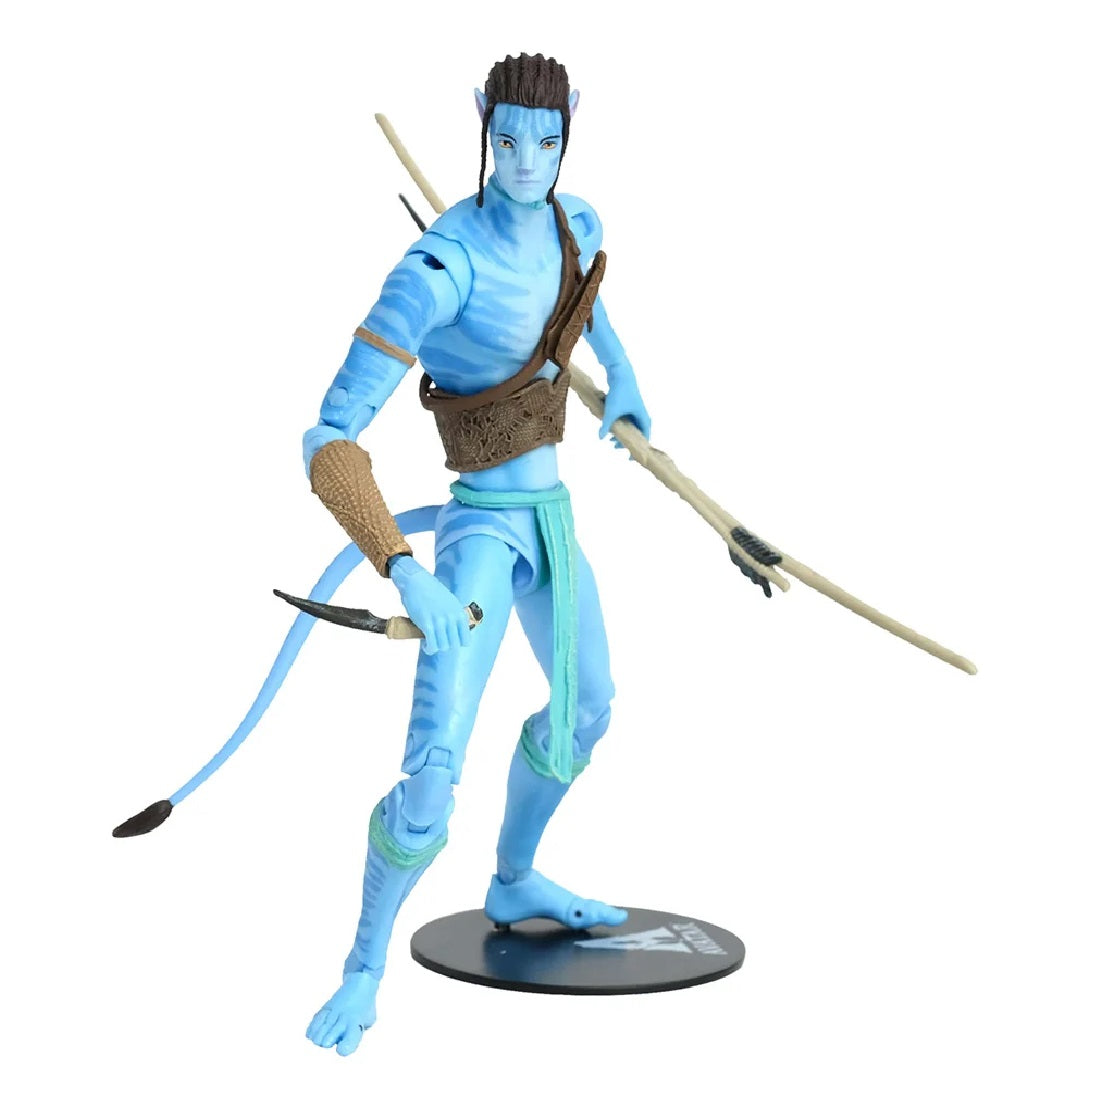 AVATAR 7IN FIGURE JAKE SULLY